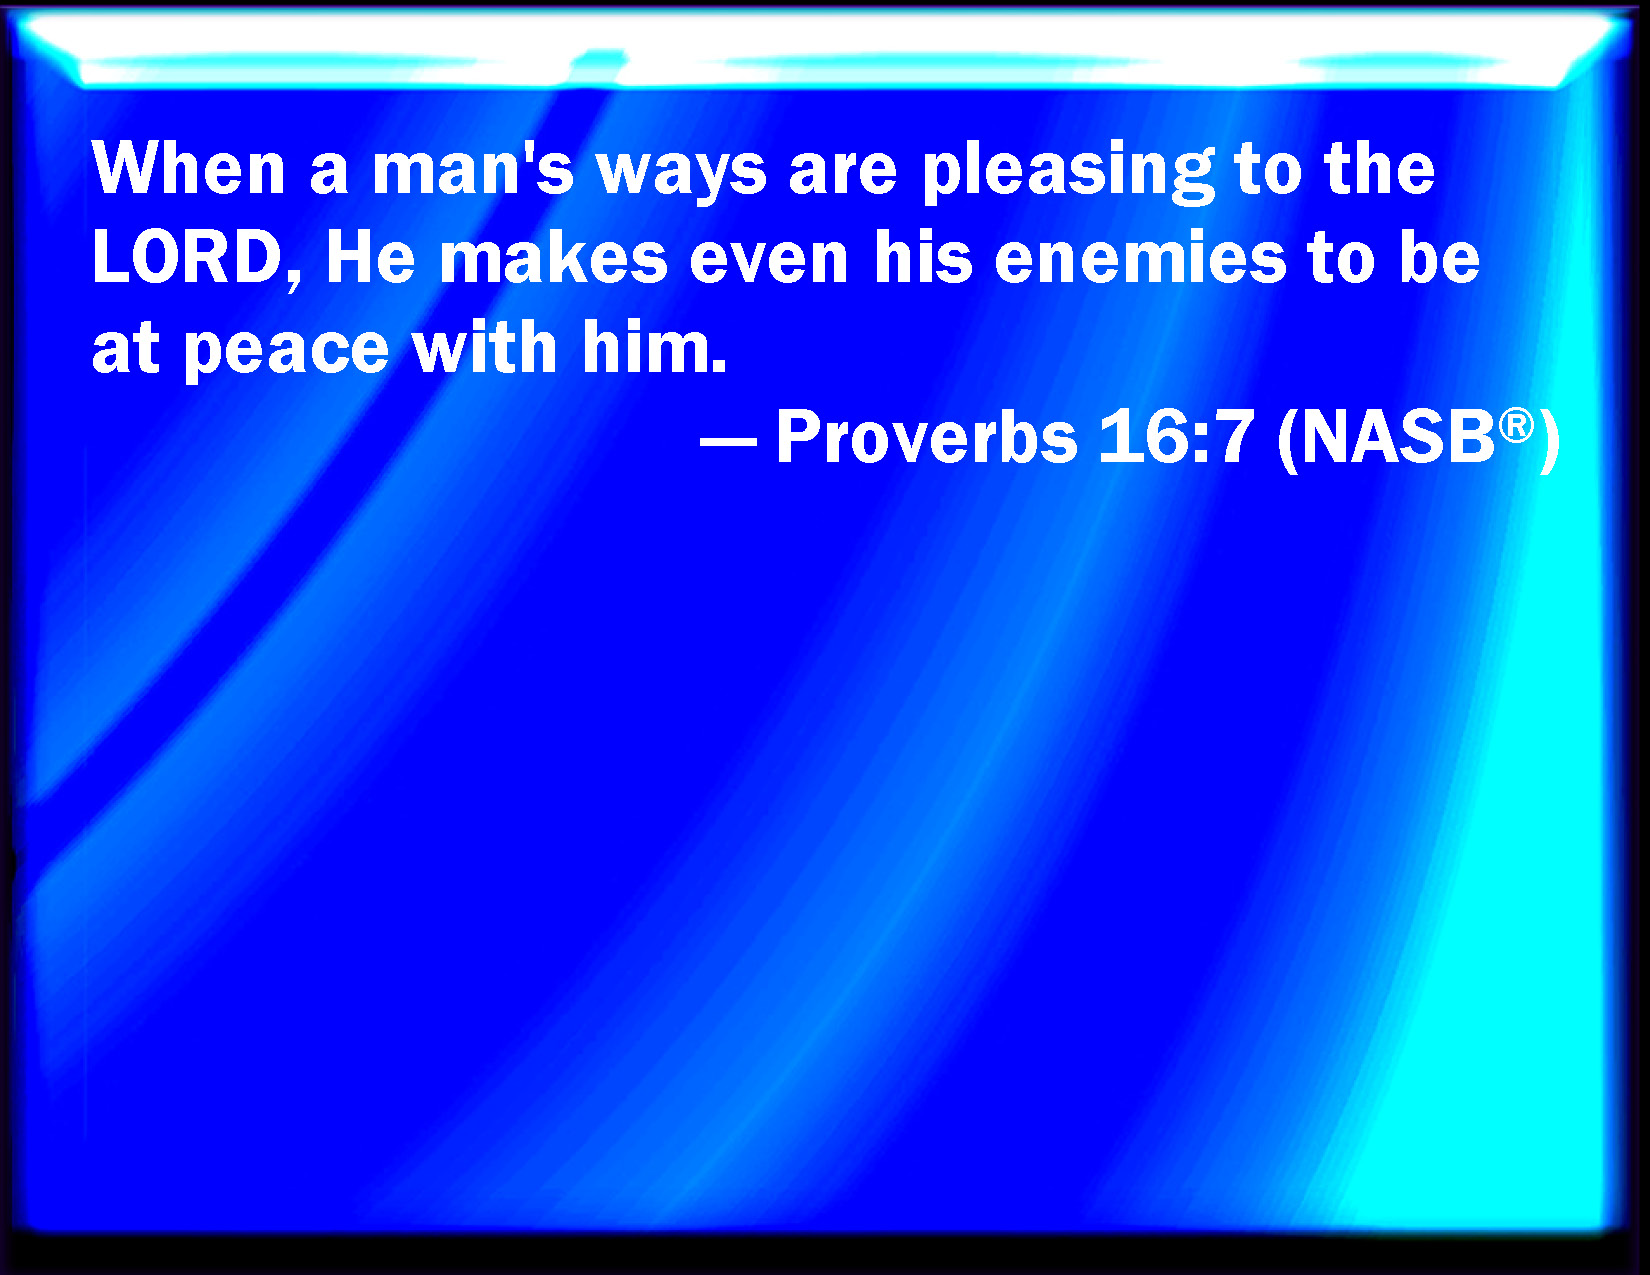 Proverbs 16:7 When a man's ways please the LORD, he makes even his